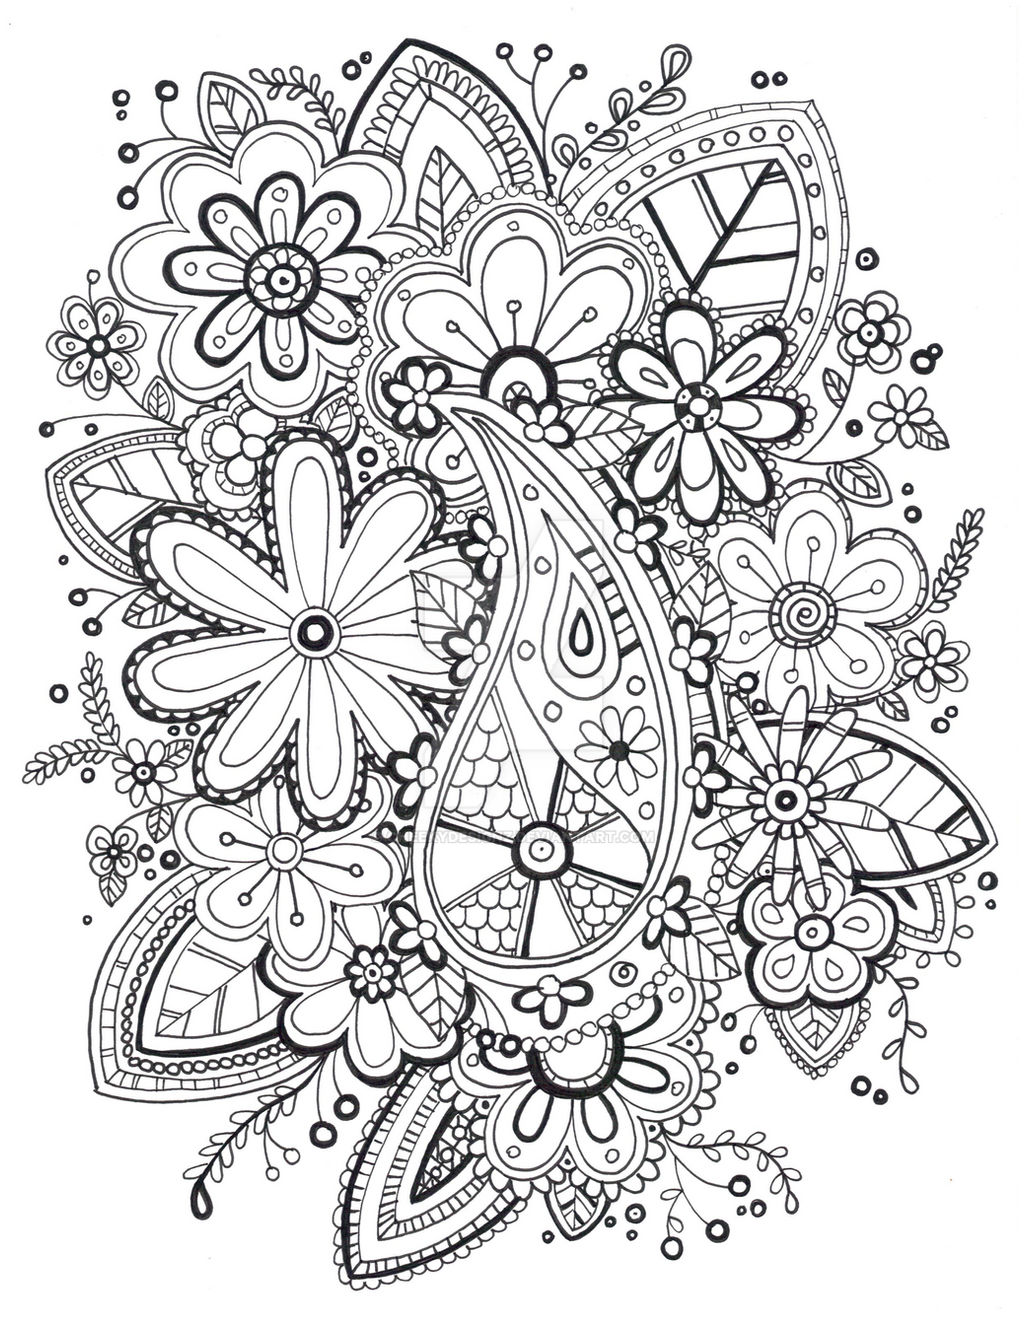 Zentangle Coloring Page by Cheekydesignz on DeviantArt